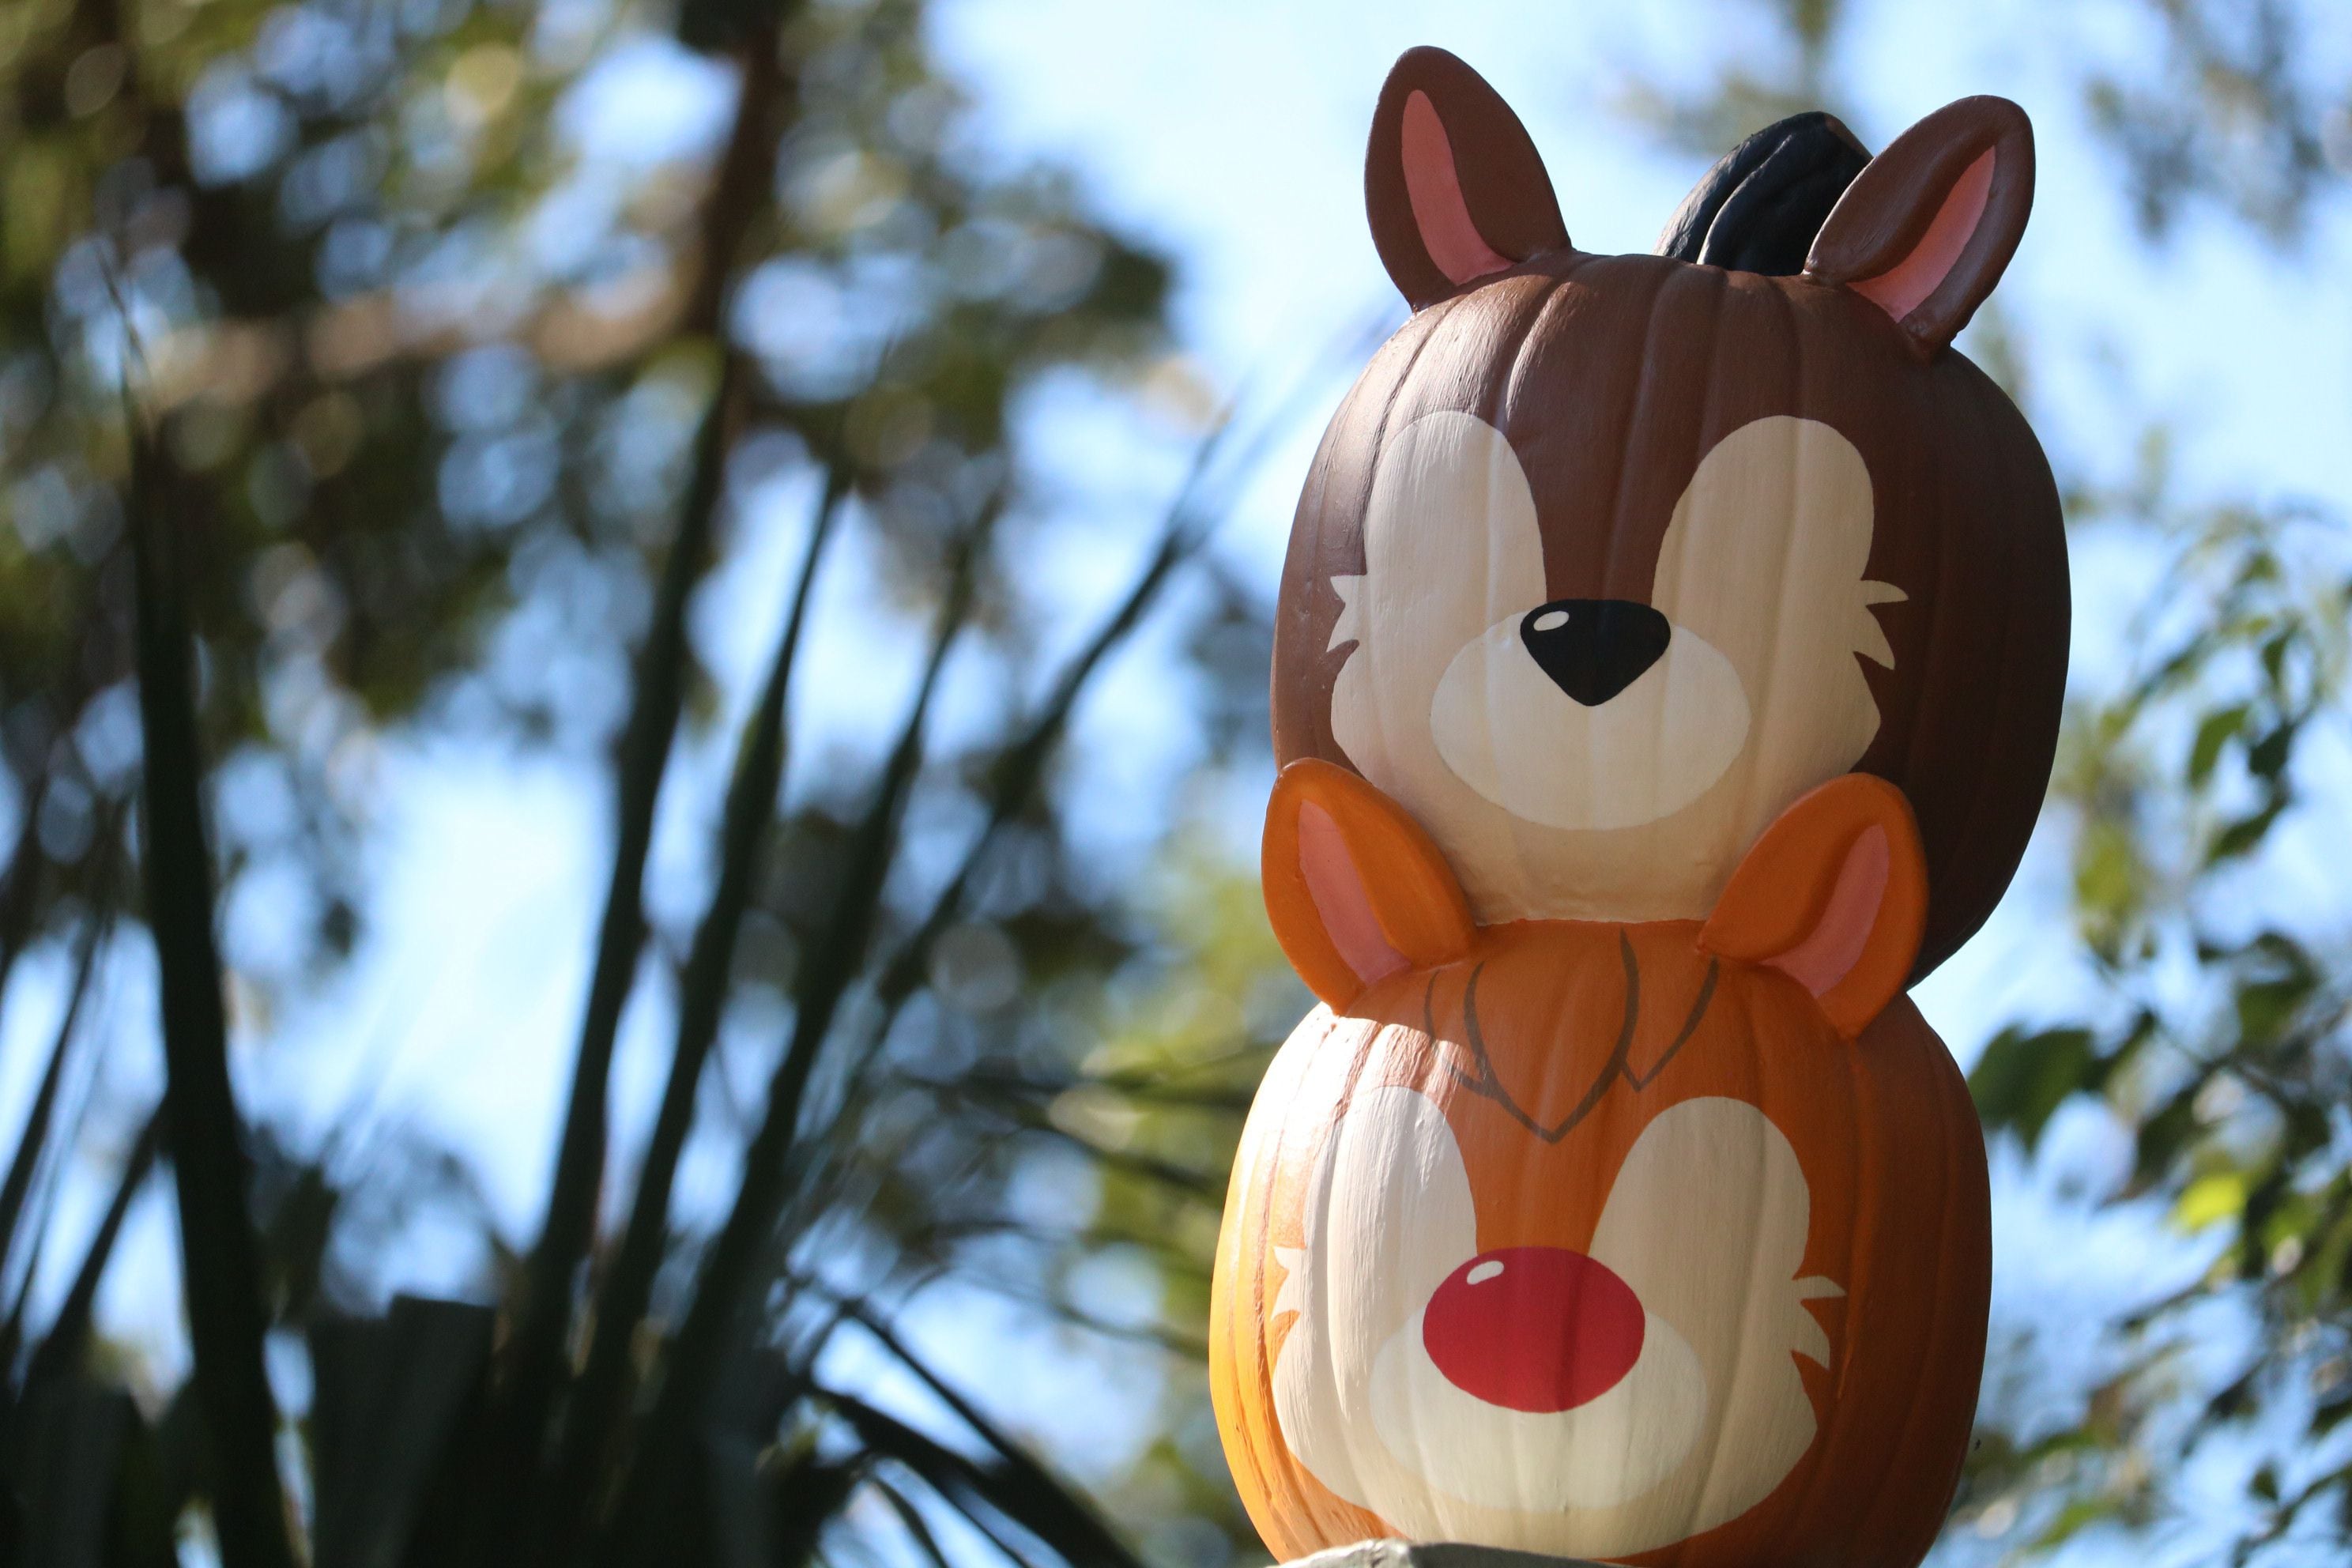 This fall scavenger hunt will have Disney fans searching for pumpkins